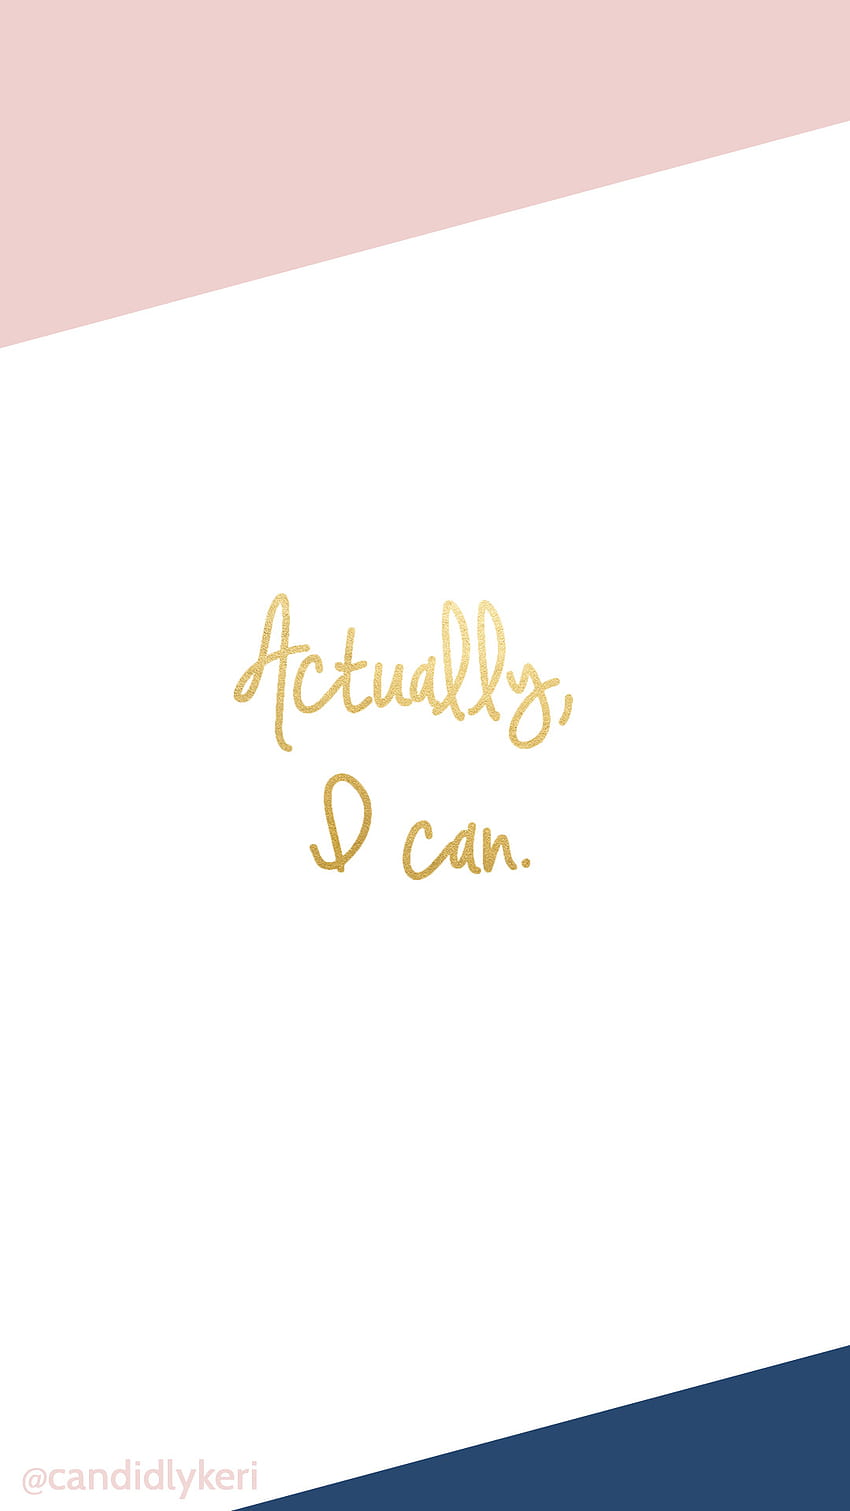 Actually I can, blush pink navy gold foil background you can for HD phone wallpaper